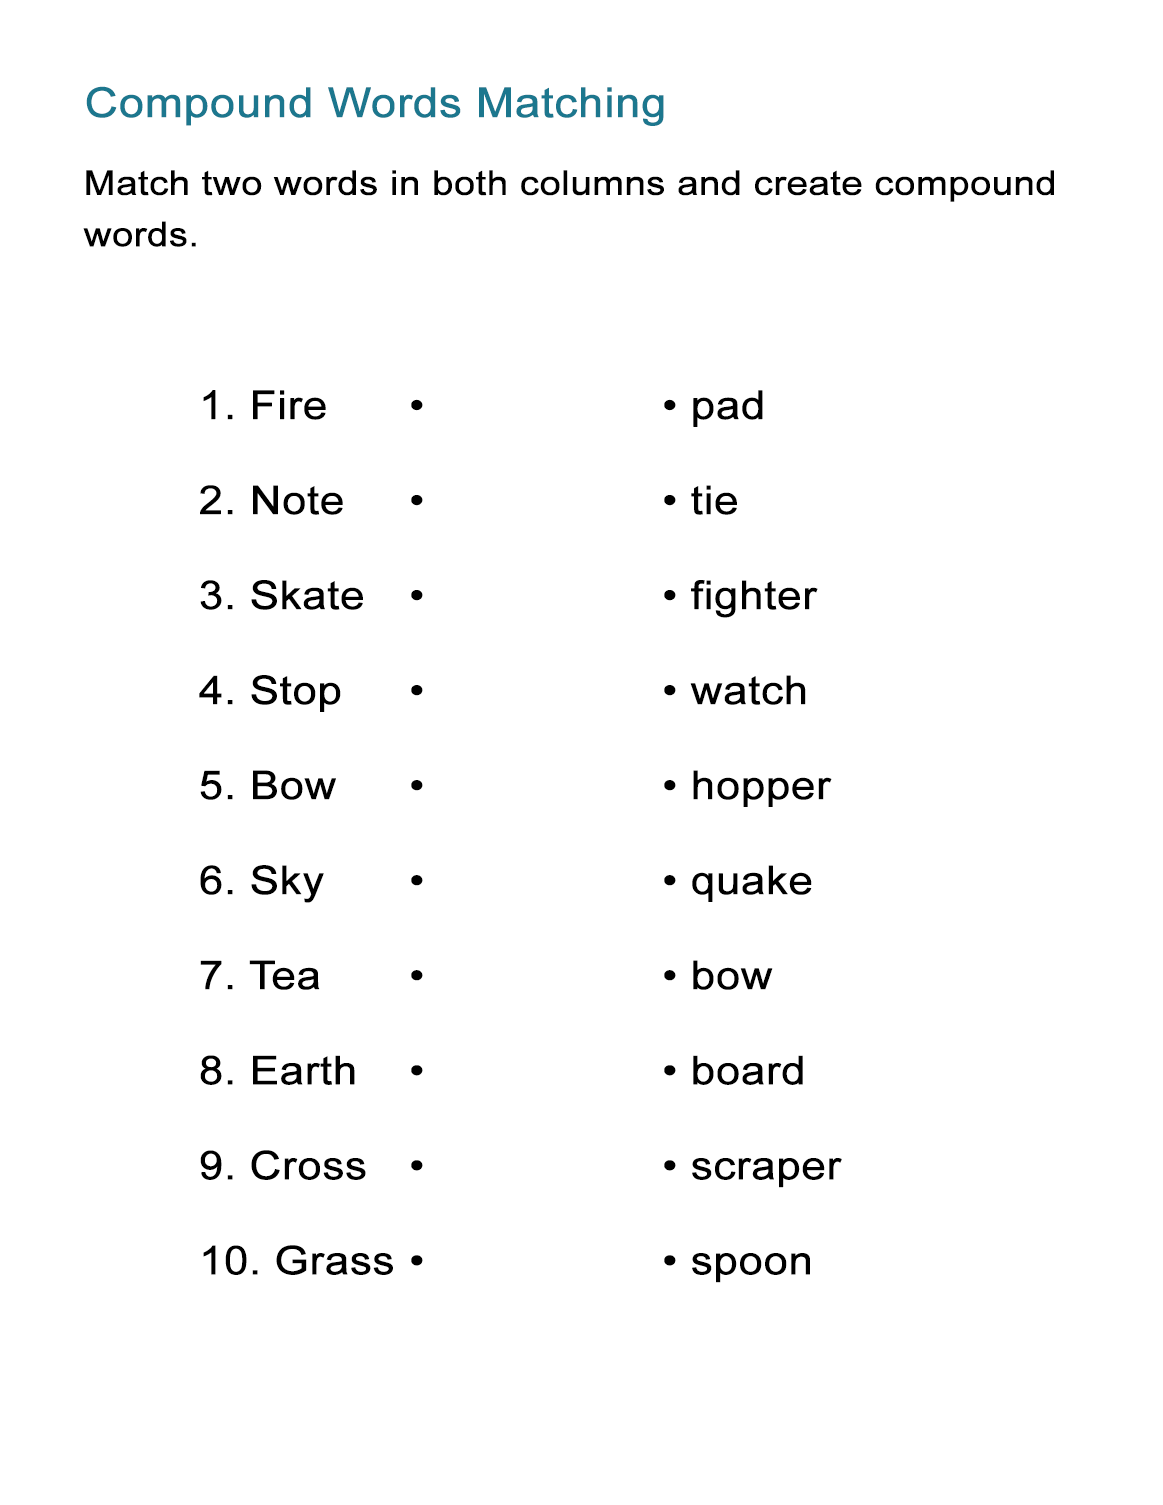 Compound Words for Kids: The Matching Game Worksheet - ALL ESL